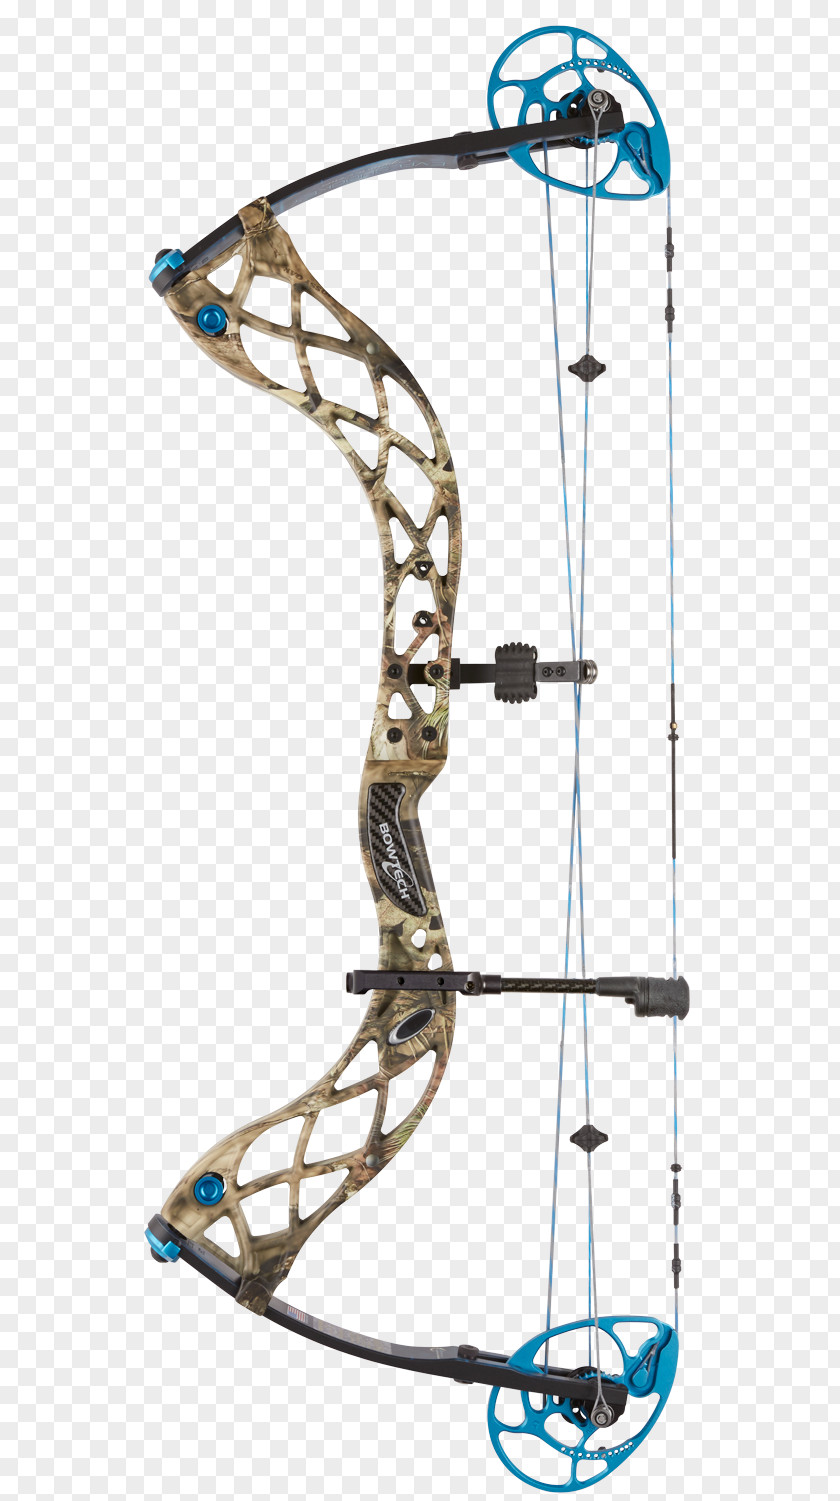 Brace Archery Bowhunting Bow And Arrow Compound Bows PNG